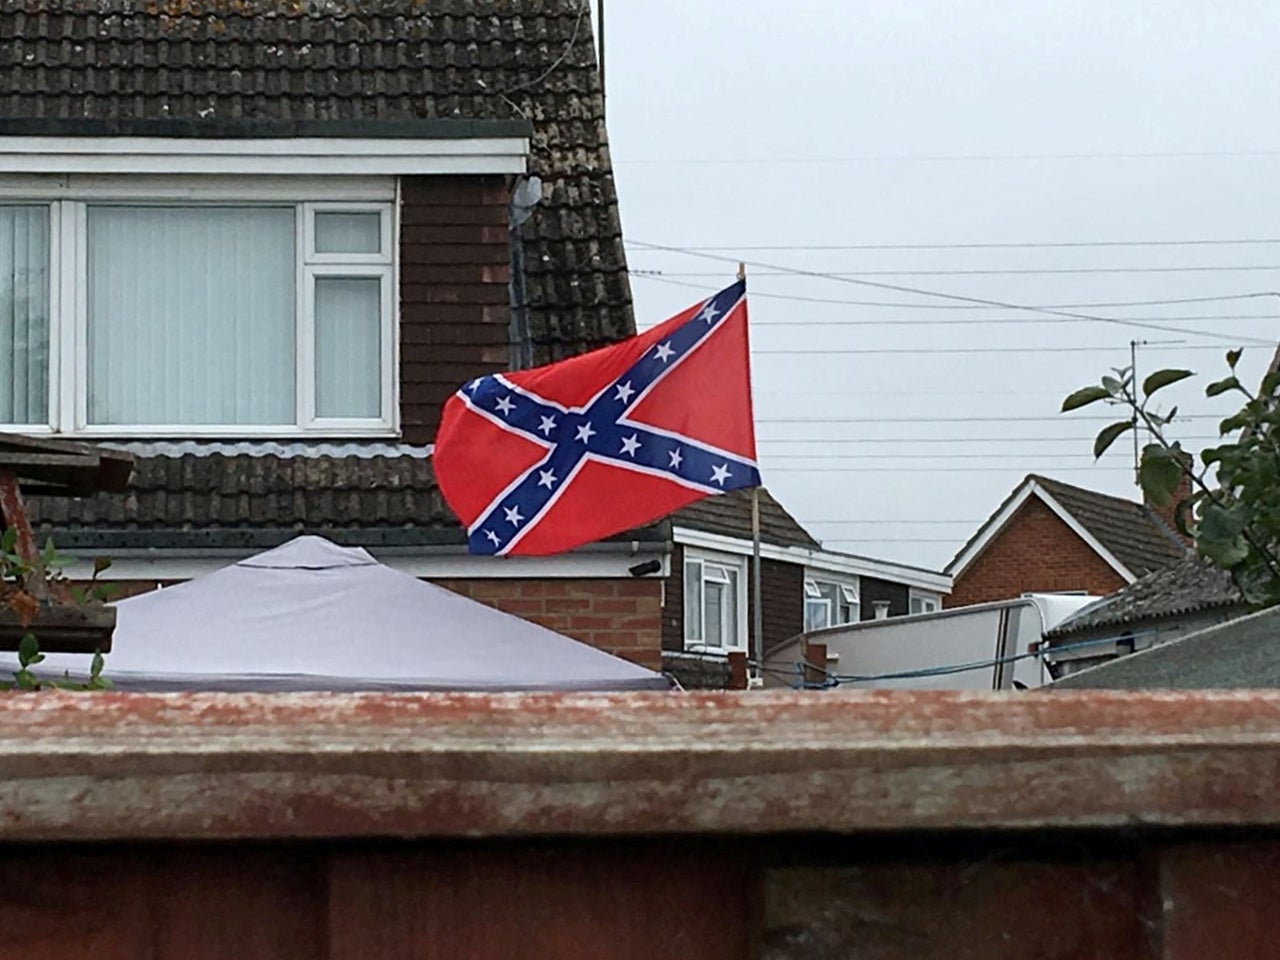 Man Forced To Take Down Racist Confederate Flag From Cheltenham Home The Independent The